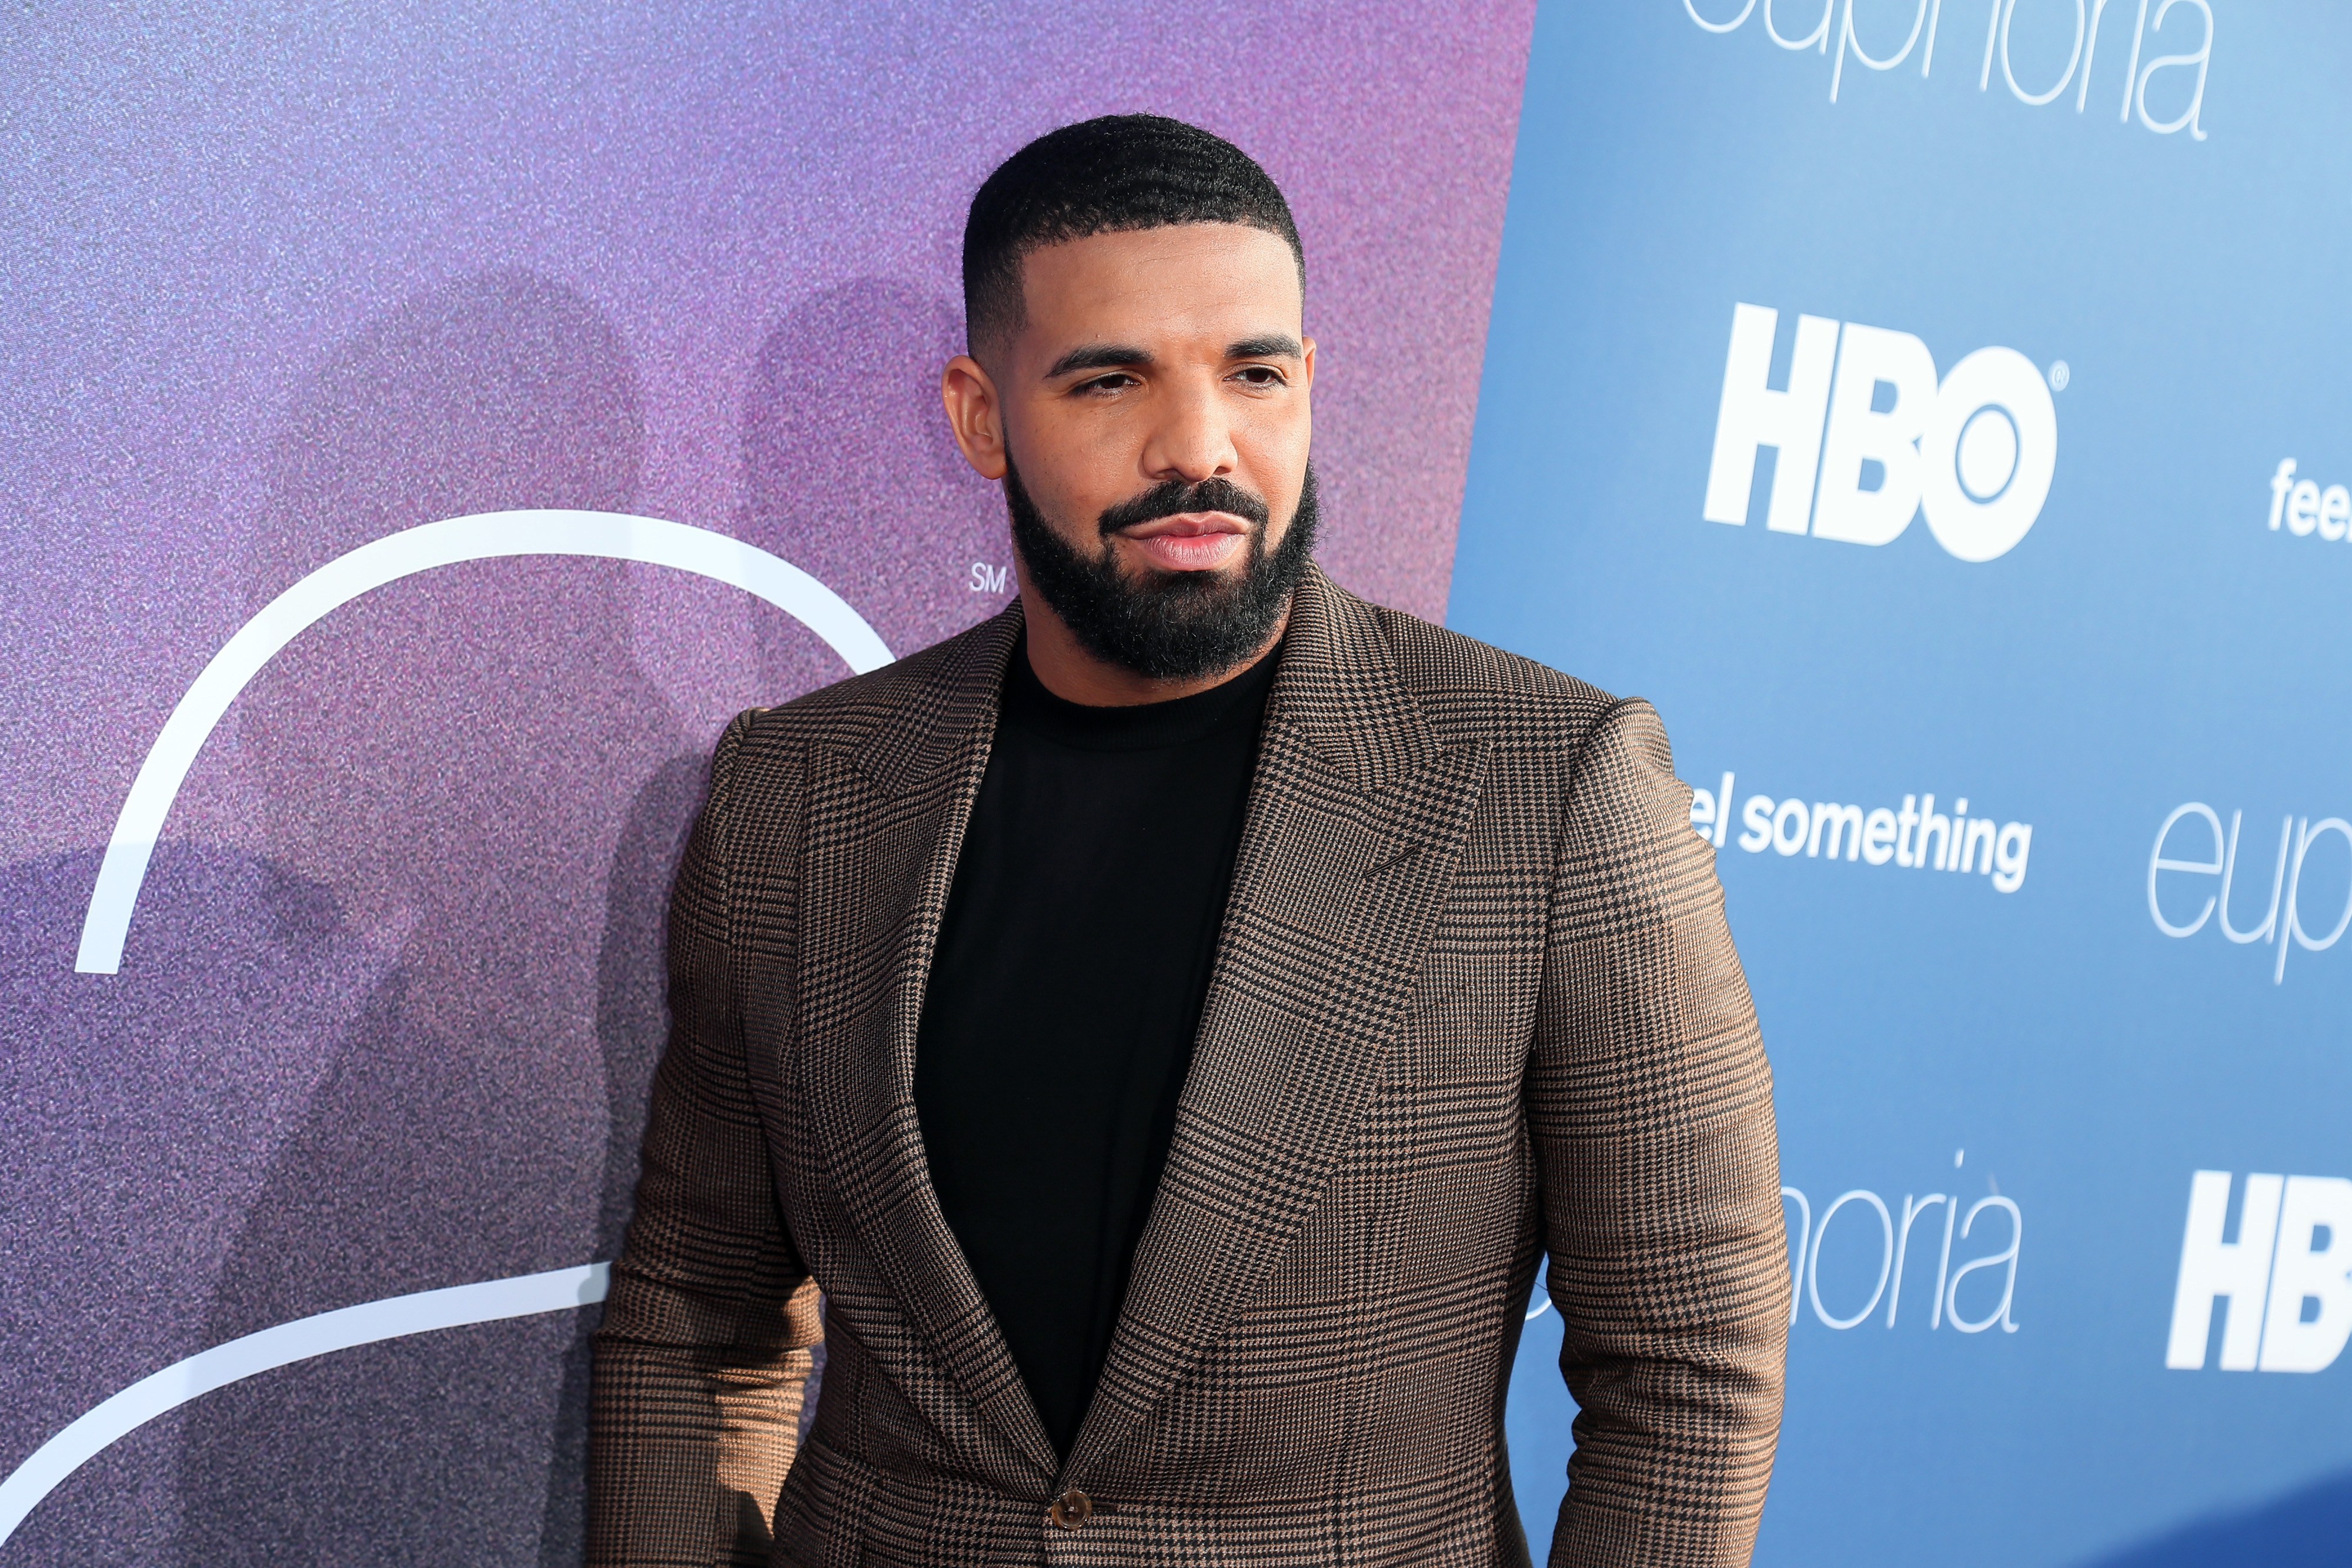 Drake delays Certified Lover Boy album release after going through rehab for knee injury